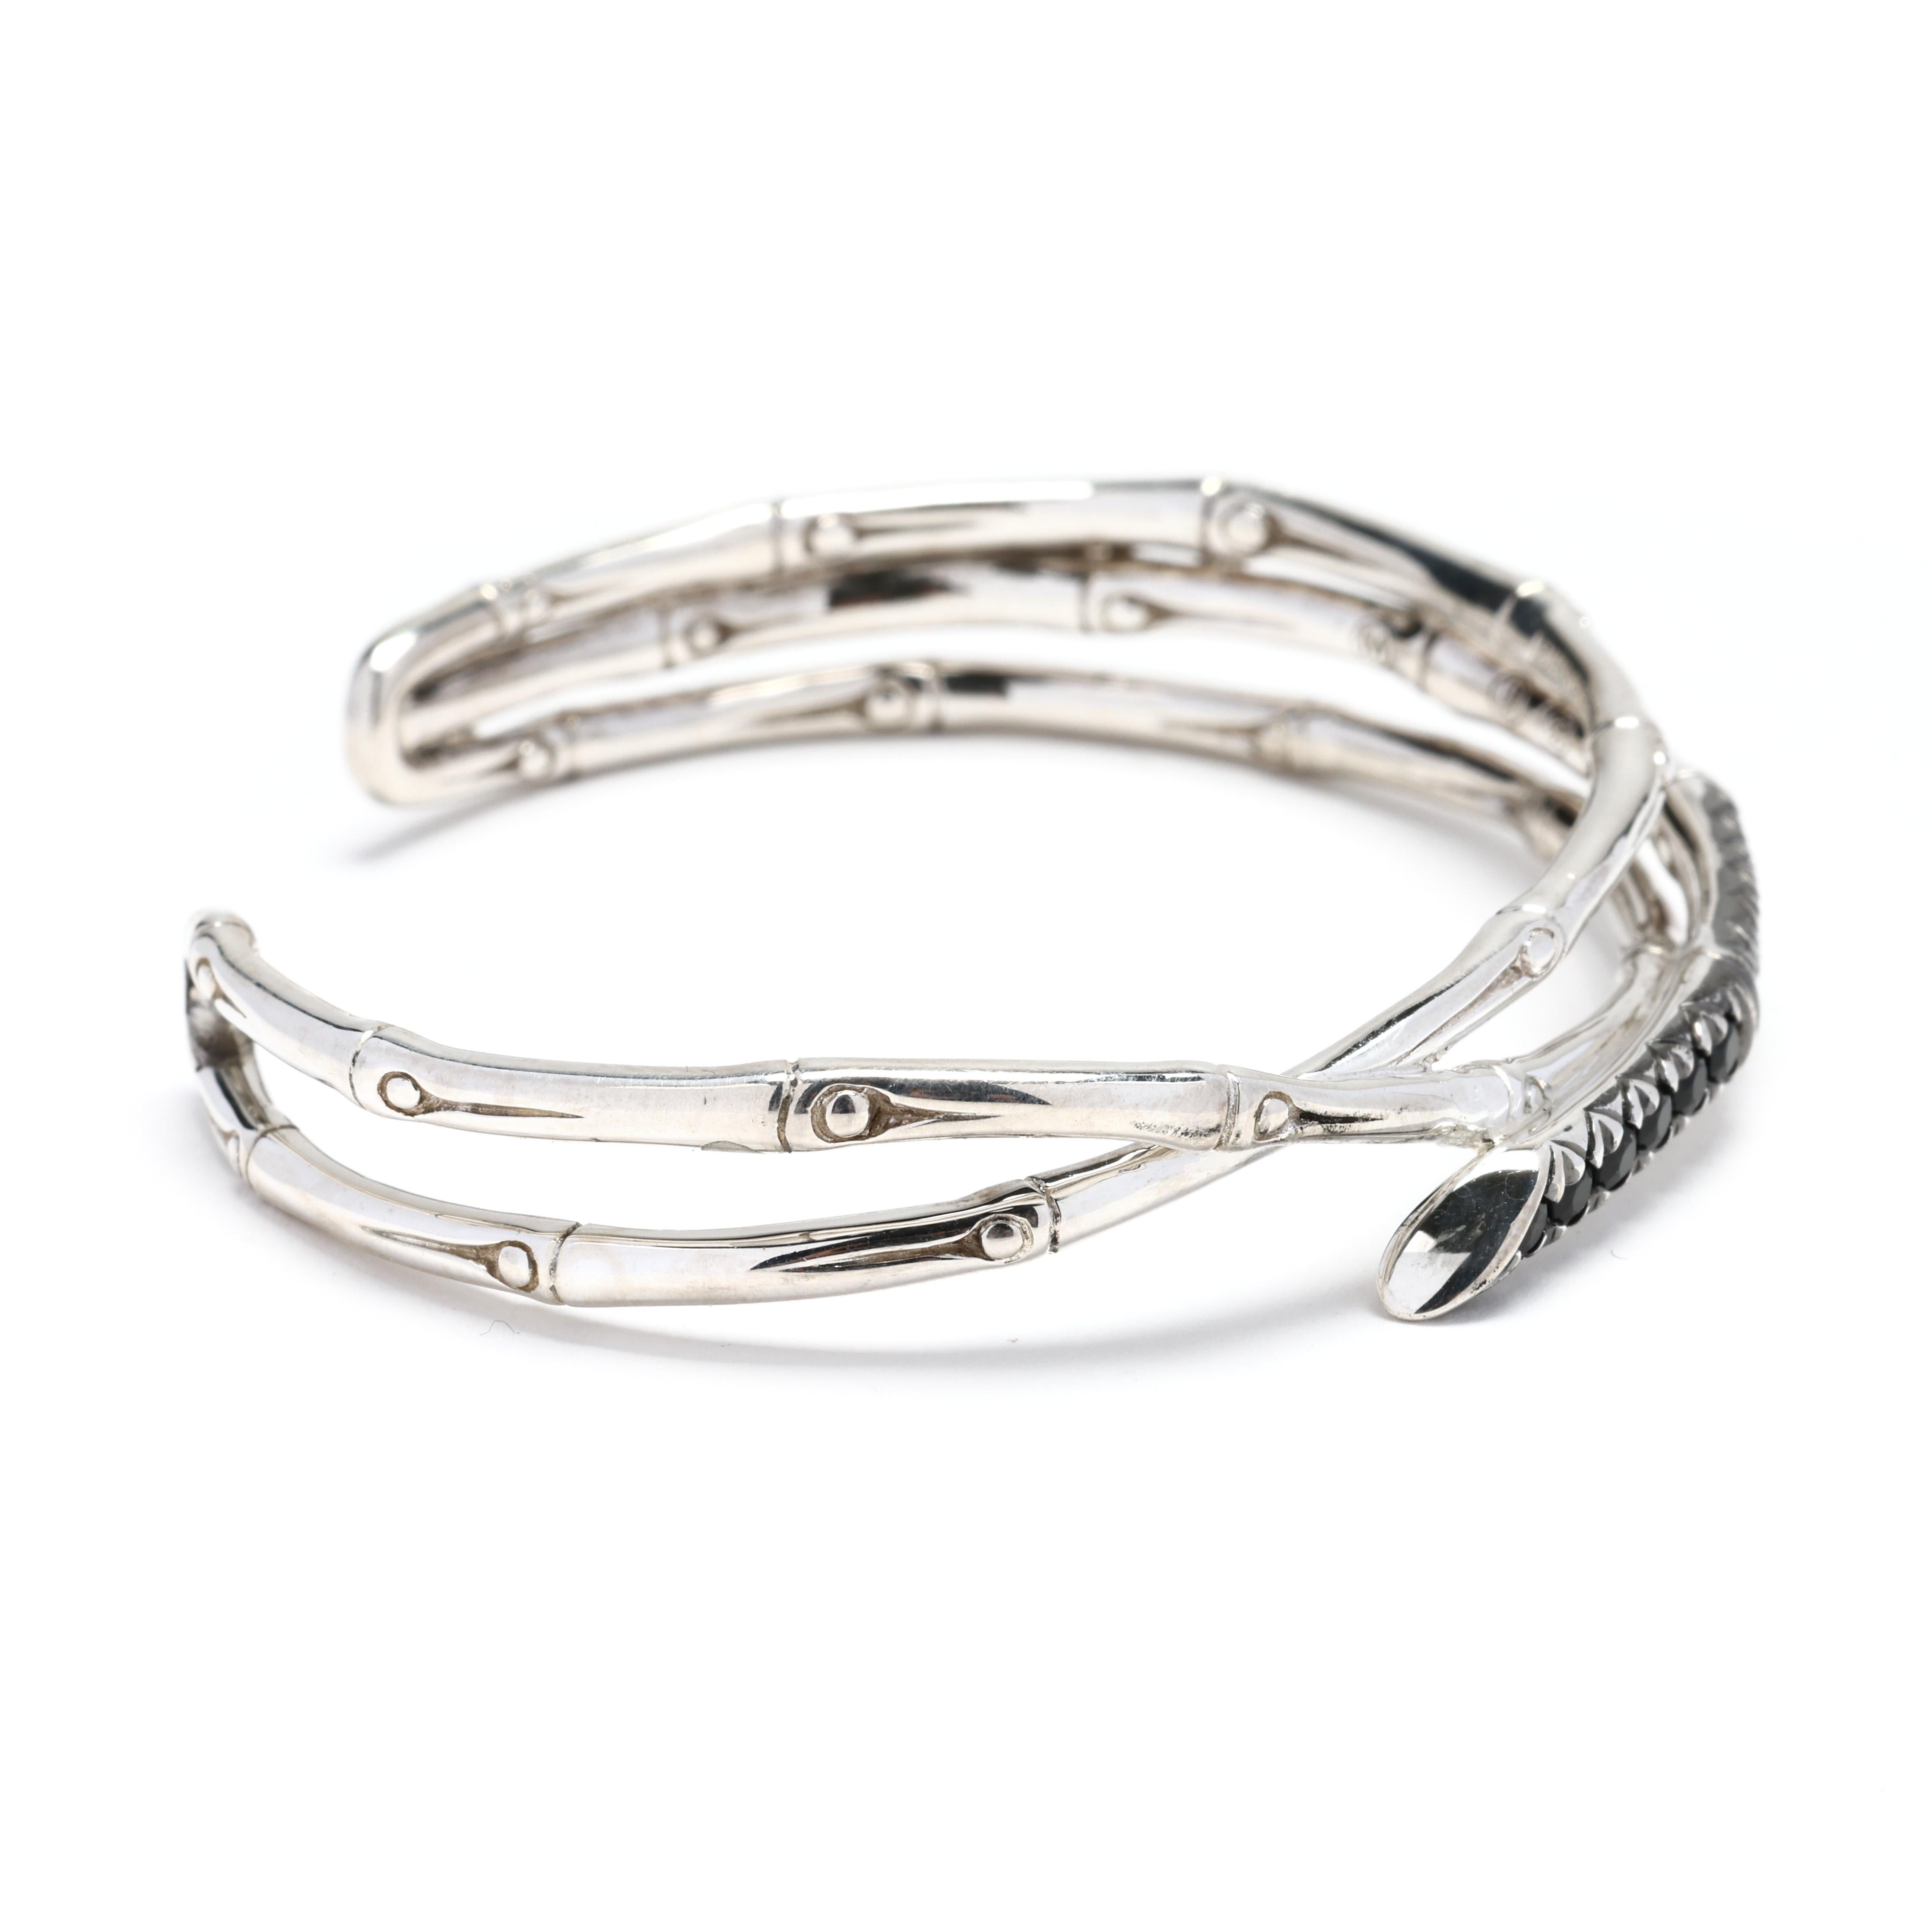 This John Hardy black sapphire bamboo bangle is a stunning accessory that combines elegance with a touch of nature-inspired design. Made from sterling silver, this twisted bracelet features an intricate bamboo pattern along with black sapphire